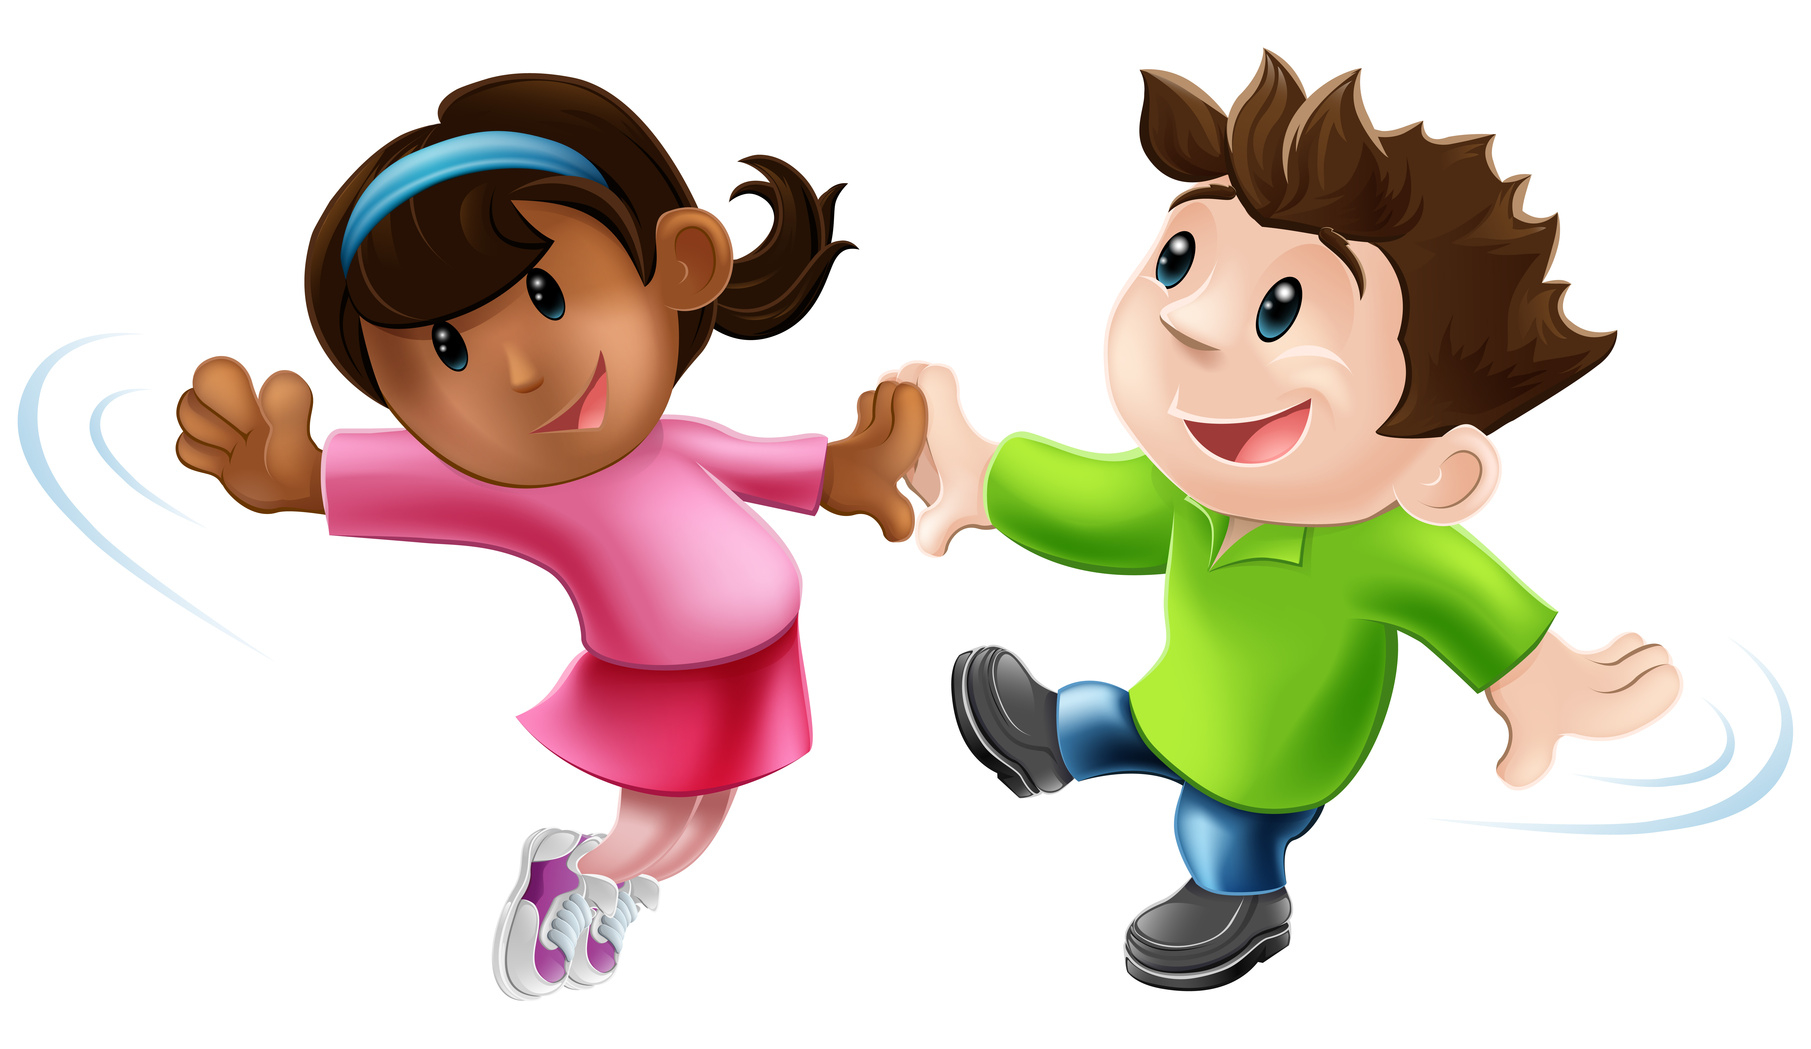 Two People Dancing Clipart